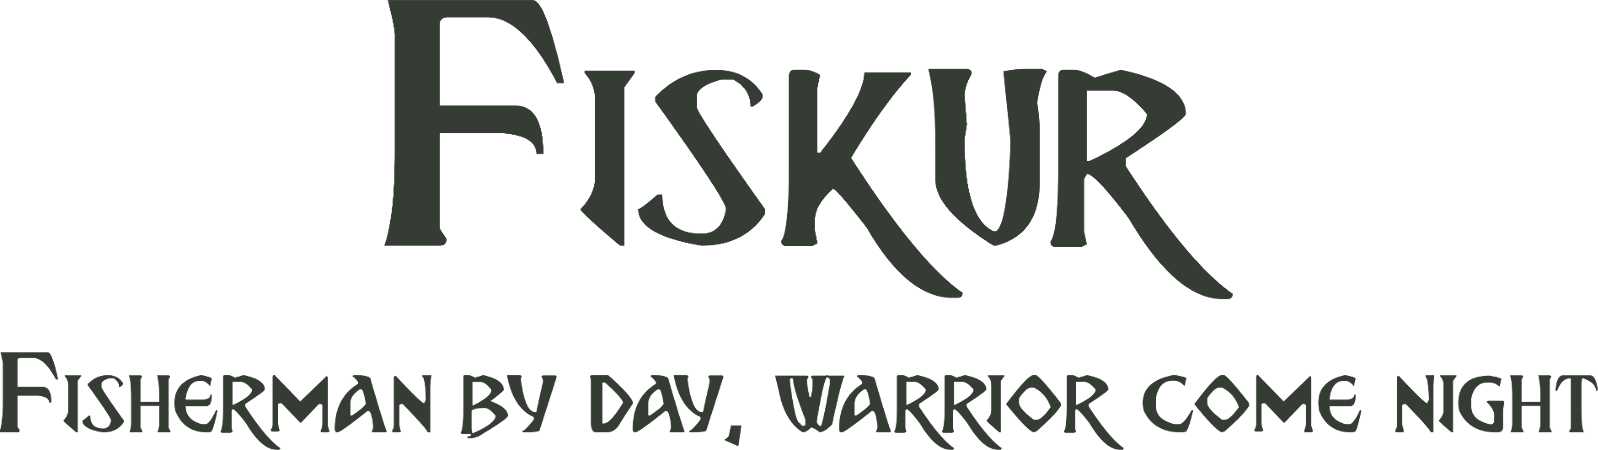 Fiskur Logo with logline: Fisherman By Day, Warrior Come Night